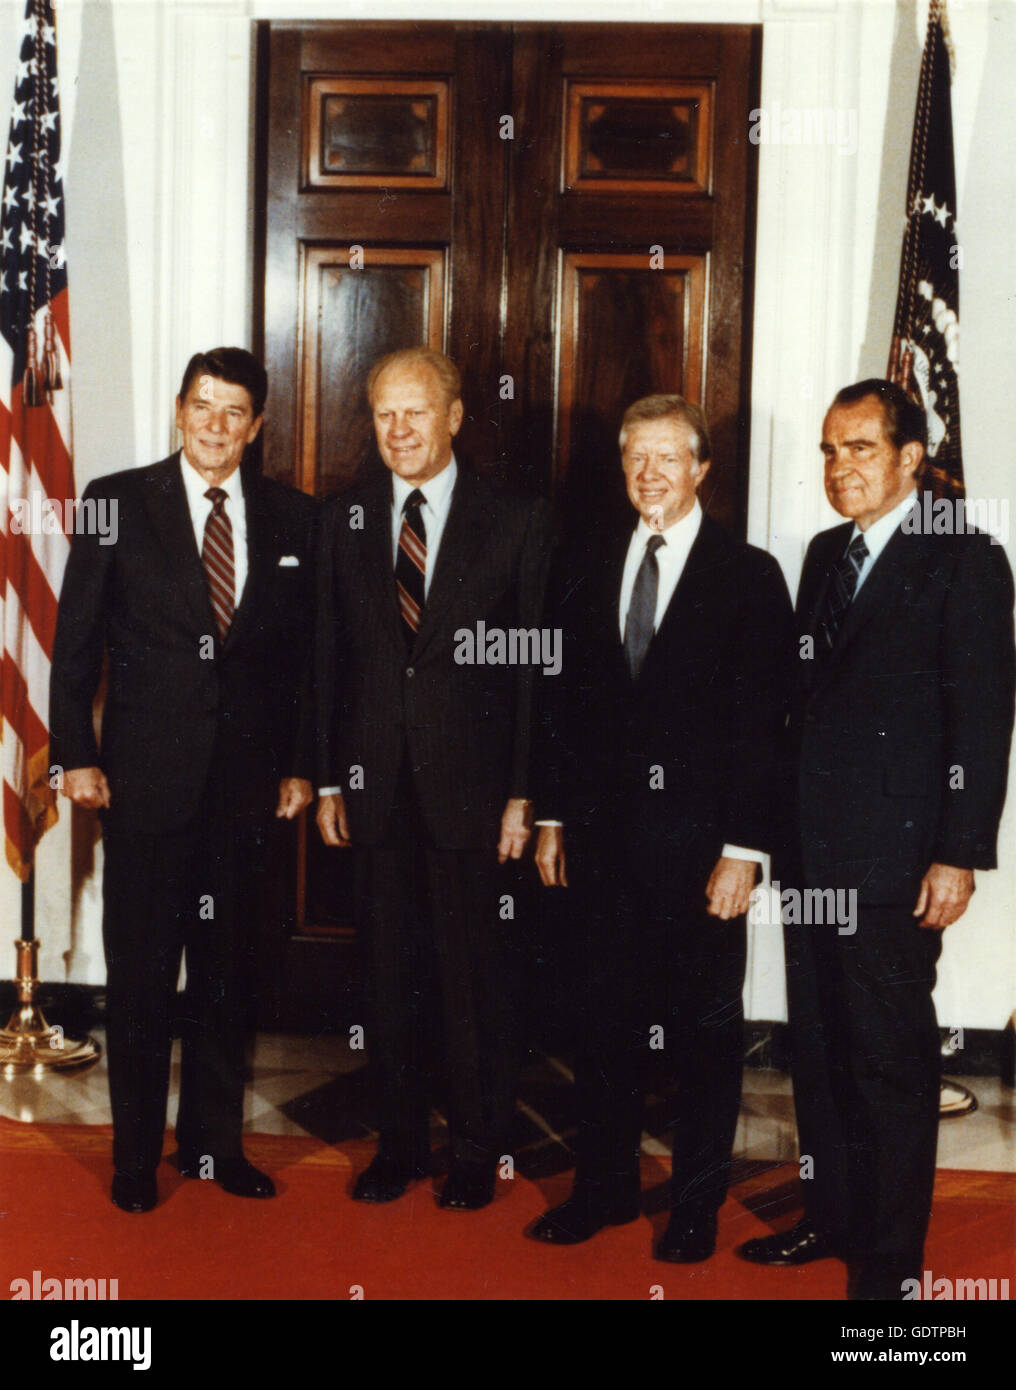 Full length portrait of President Ronald Reagan with former Presidents Gerald R. Ford, James E. Carter and Richard M. Nixon. Stock Photo